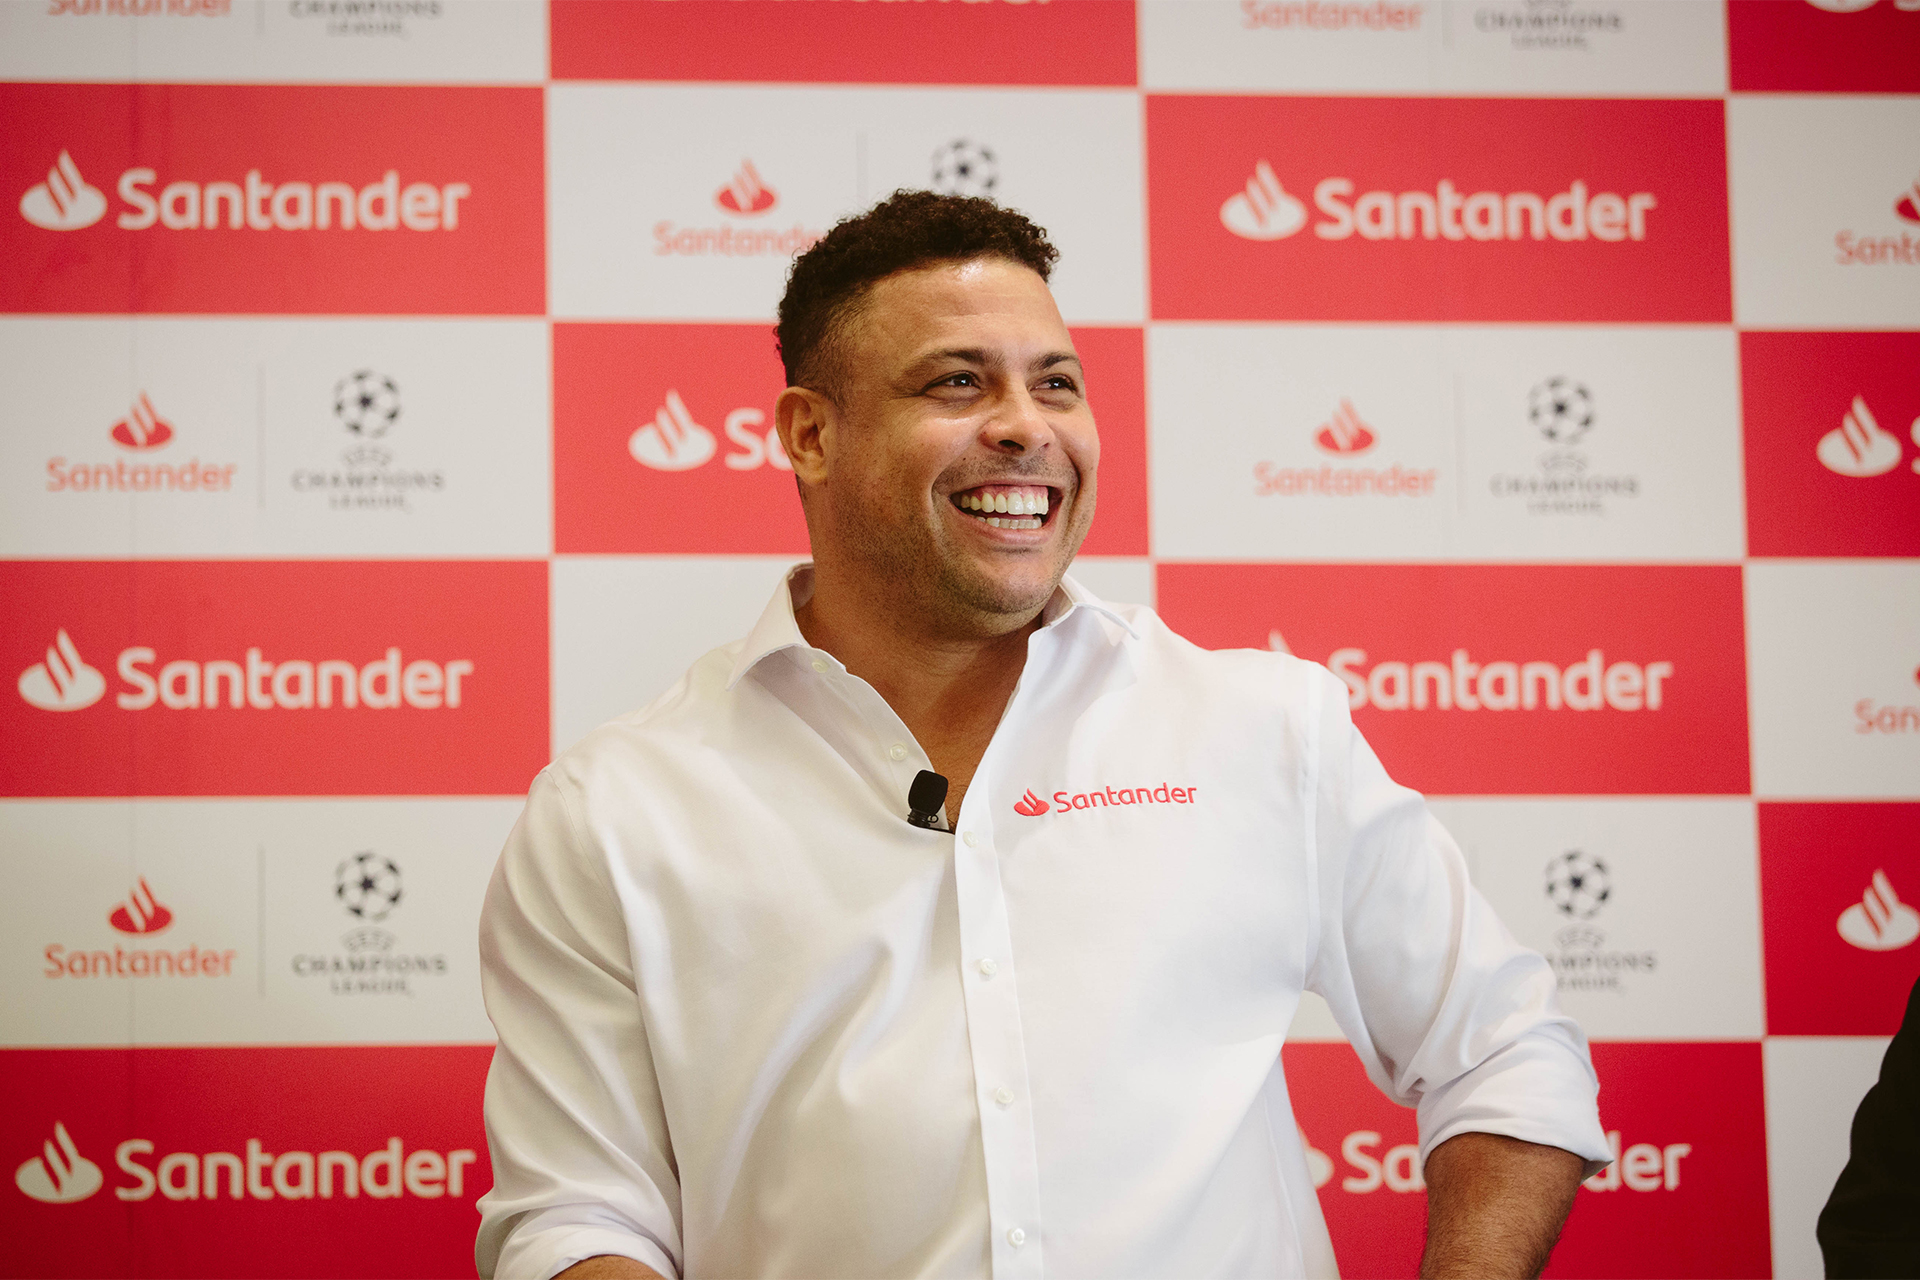 Ronaldo Nazário, the ambassador for our sponsorship of the UEFA Champions  League, encourages us to stay at home